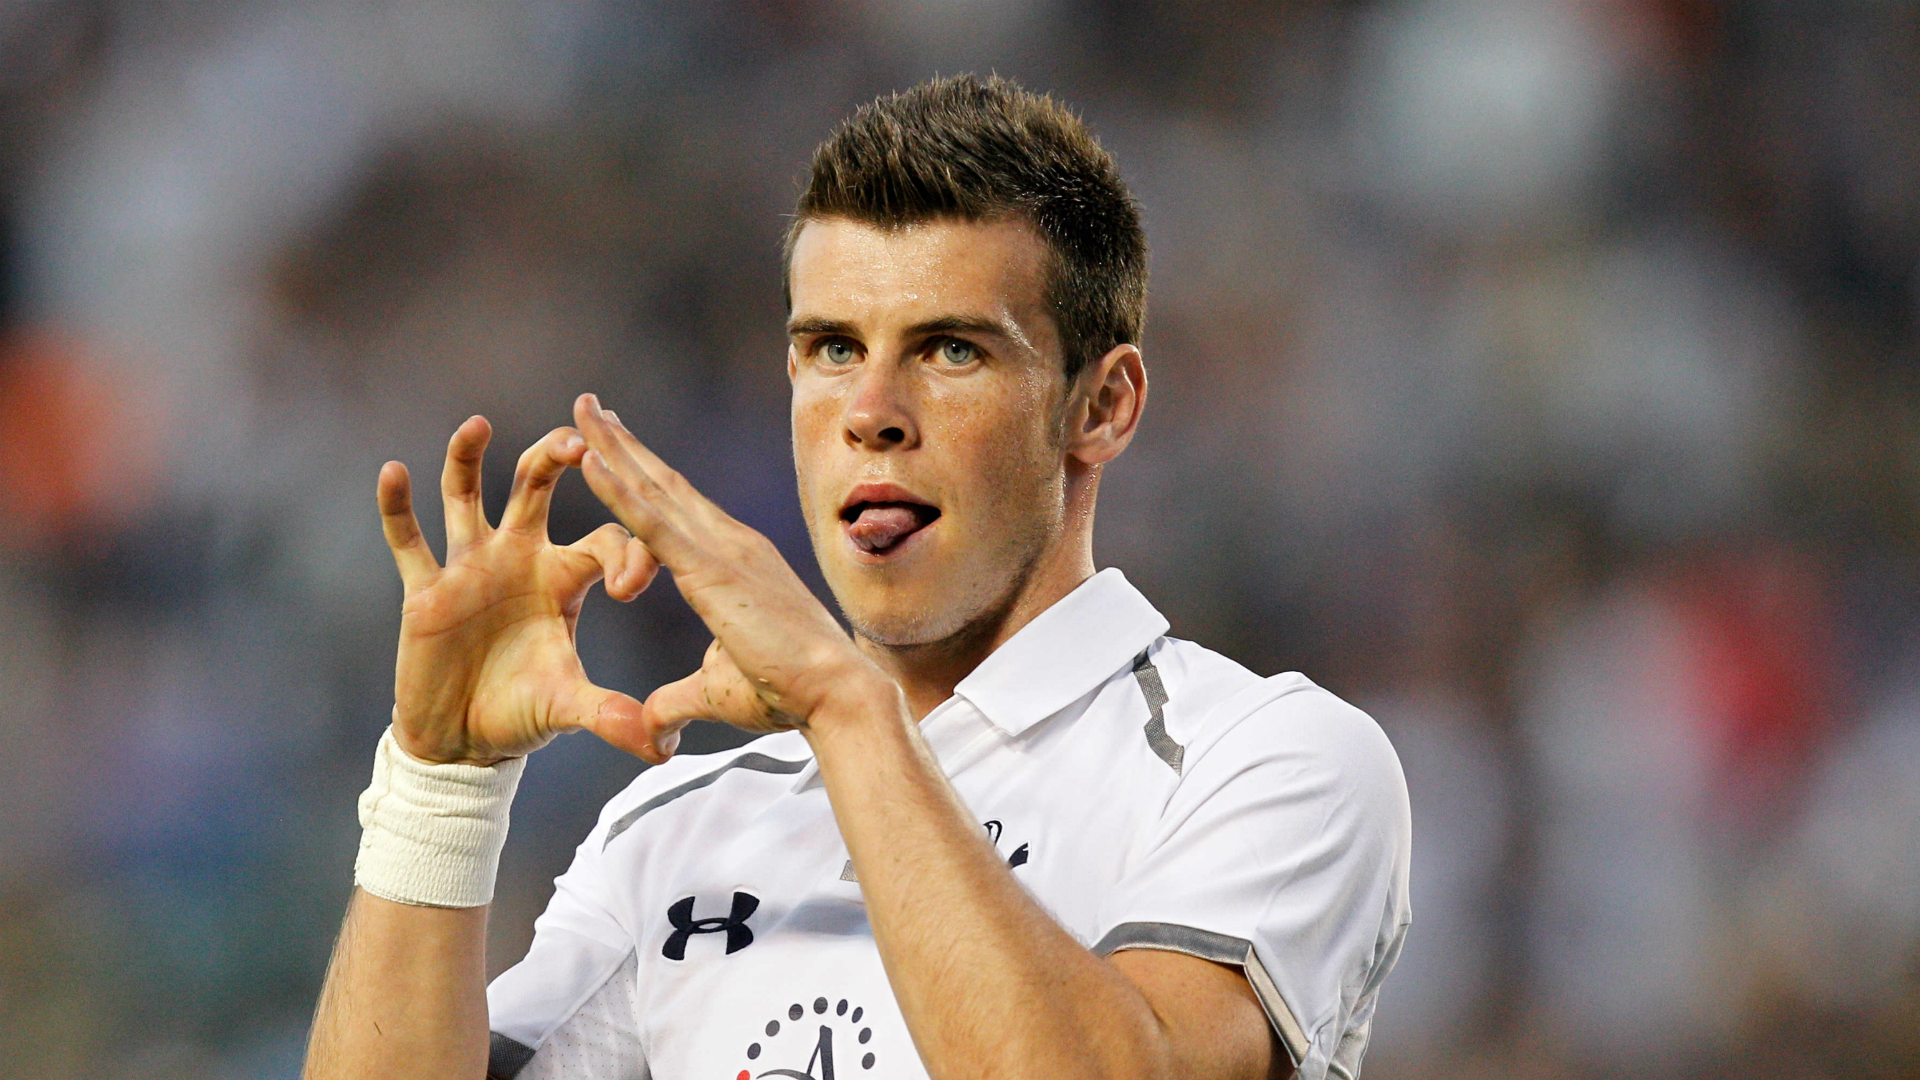 Zinedine Zidane has made it clear he wants Gareth Bale to leave Real Madrid, so where can the Wales forward go next?